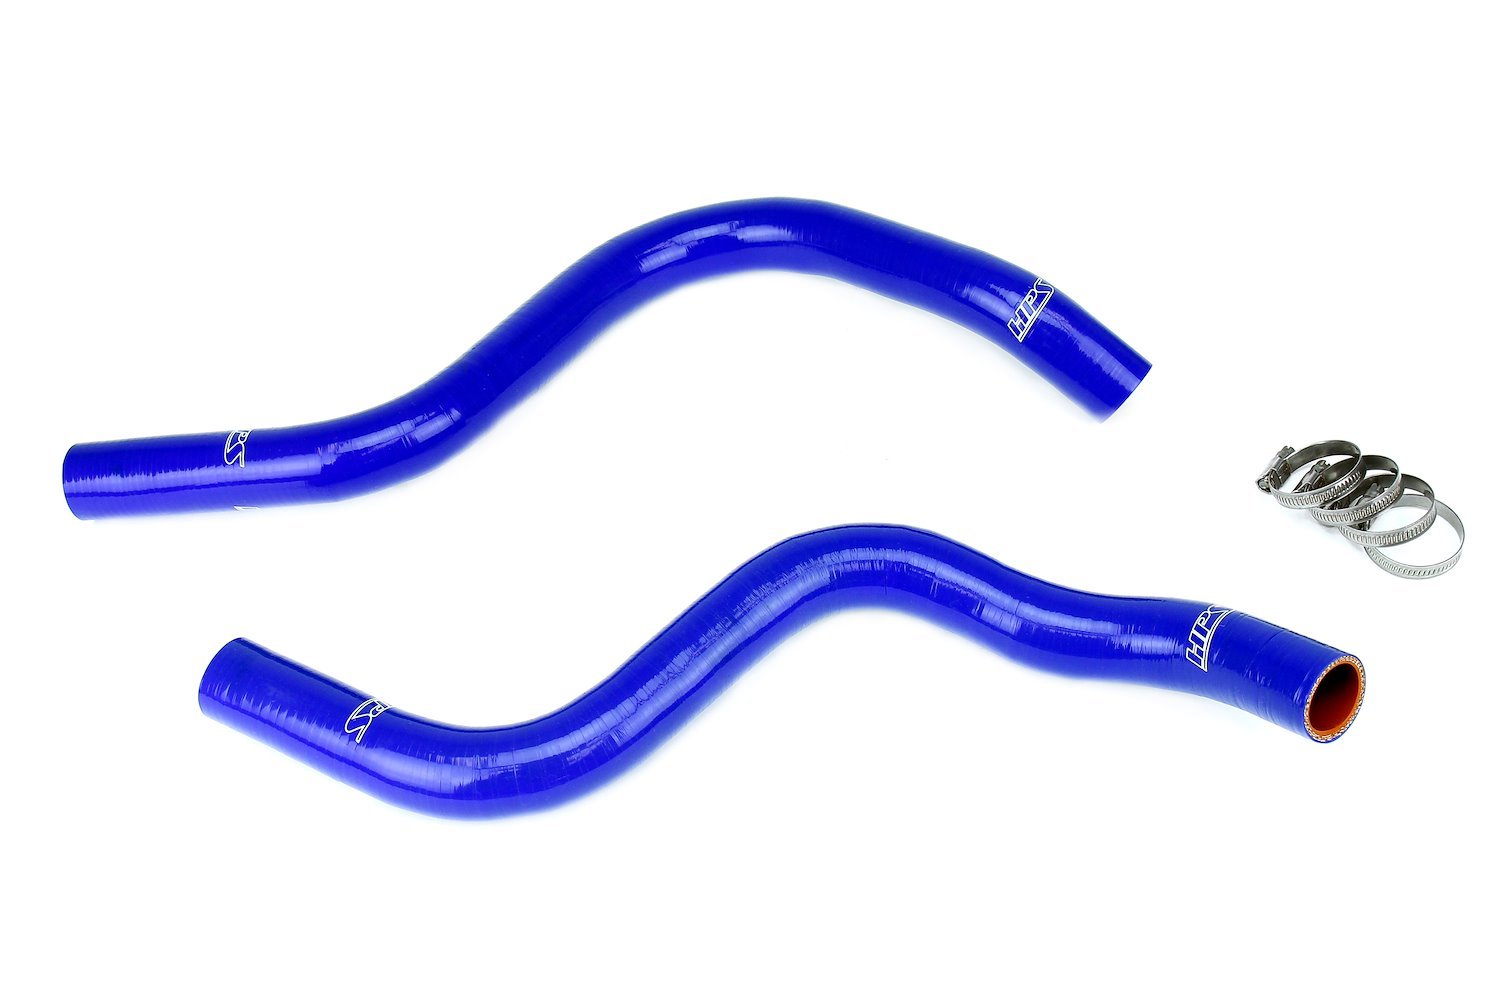 57-1817-BLUE Radiator Hose Kit, 3-Ply Reinforced Silicone, Replaces Rubber Radiator Coolant Hoses